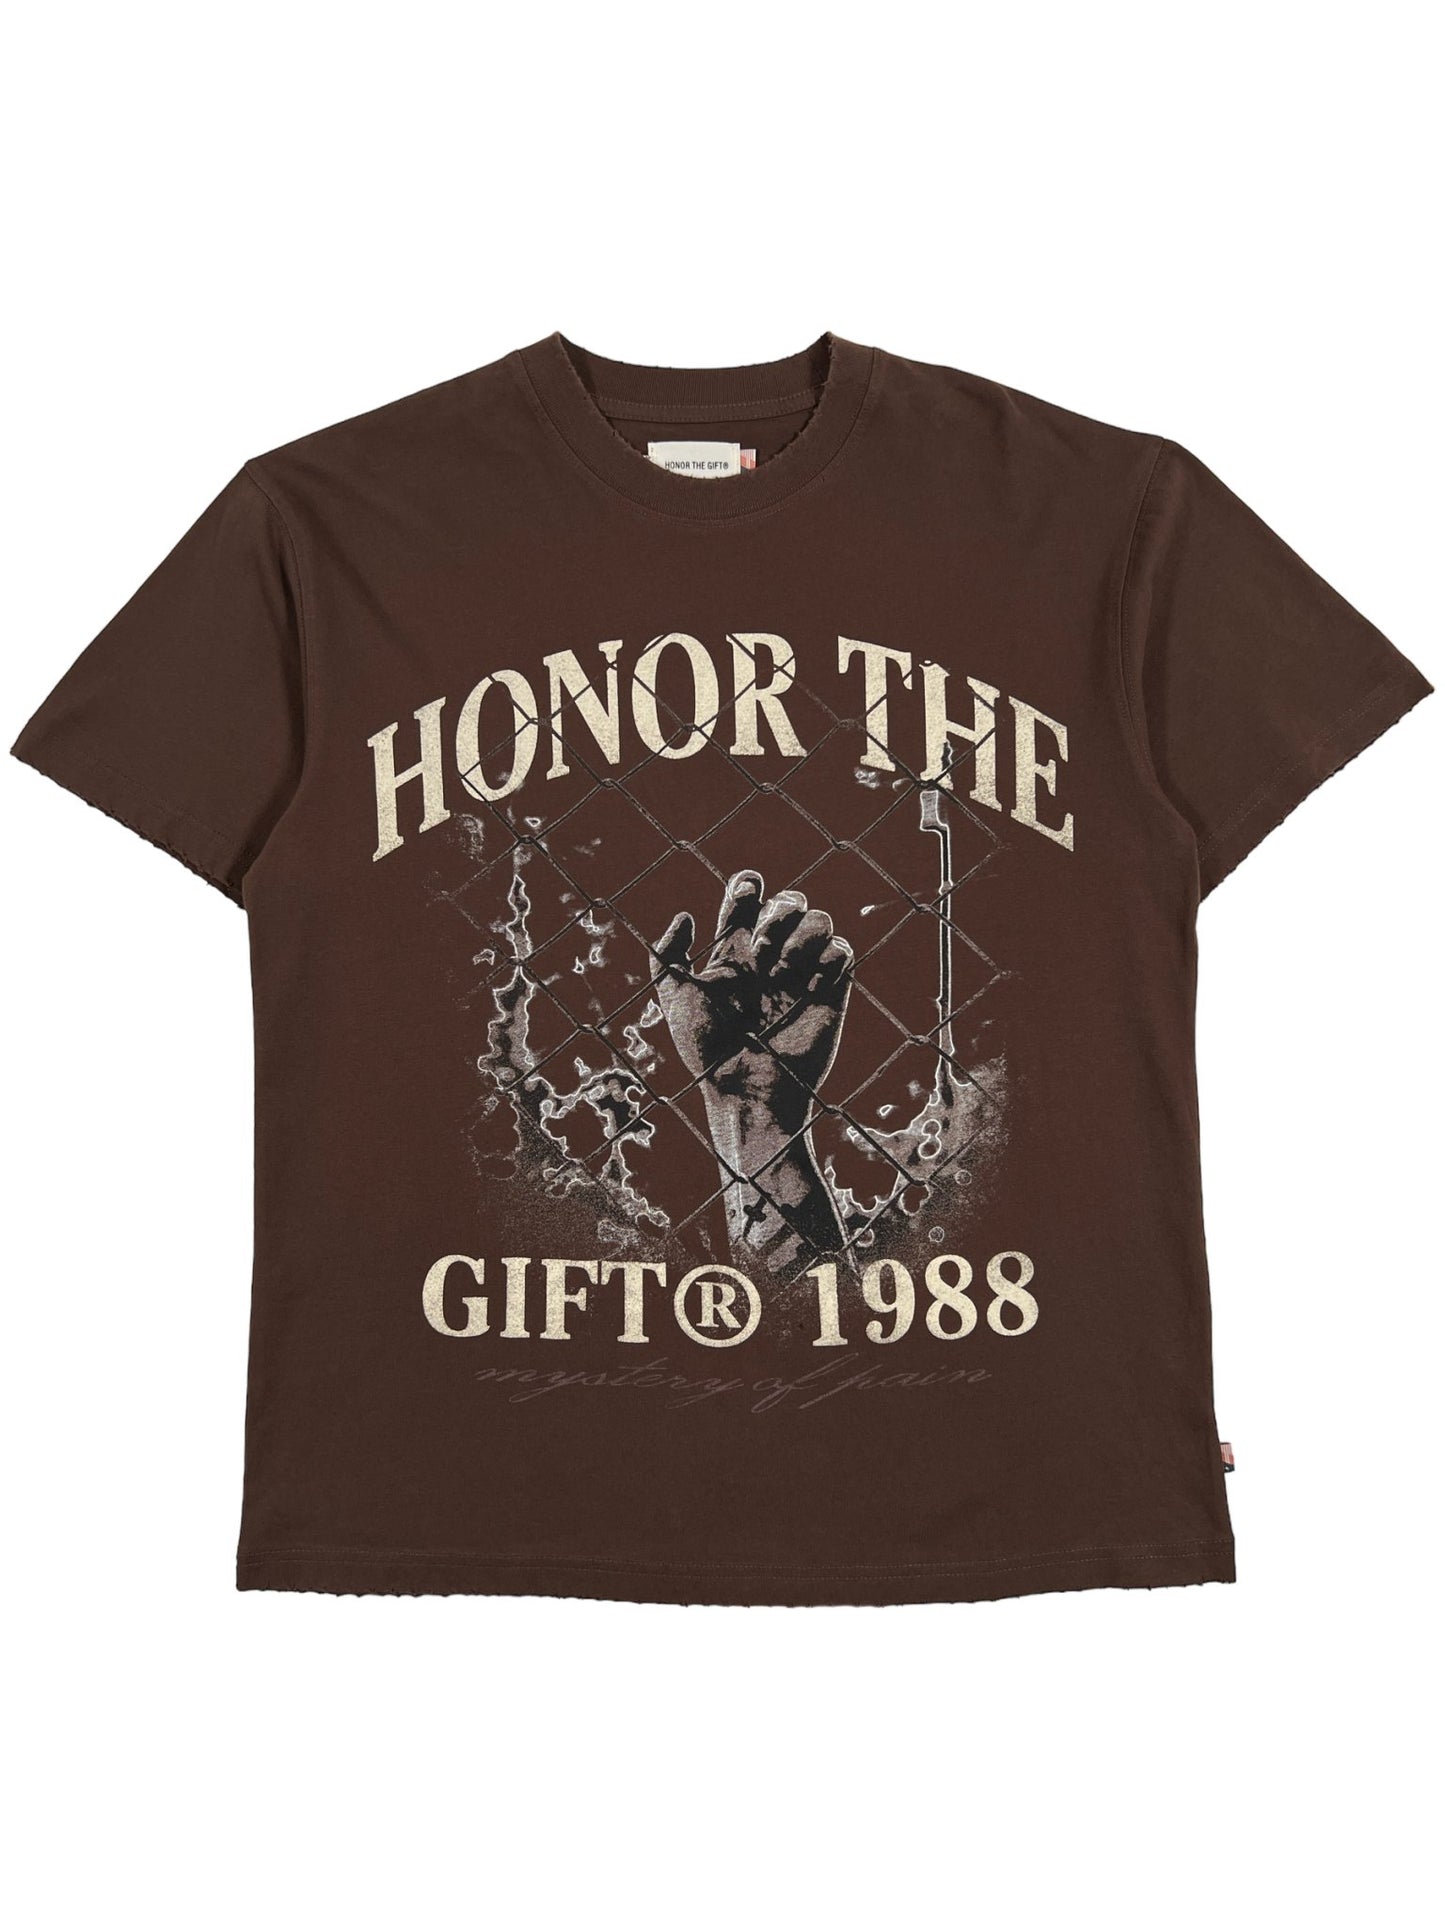 Probus HONOR THE GIFT MYSTERY OF PAIN TEE BROWN HONOR THE GIFT MYSTERY OF PAIN TEE BROWN S